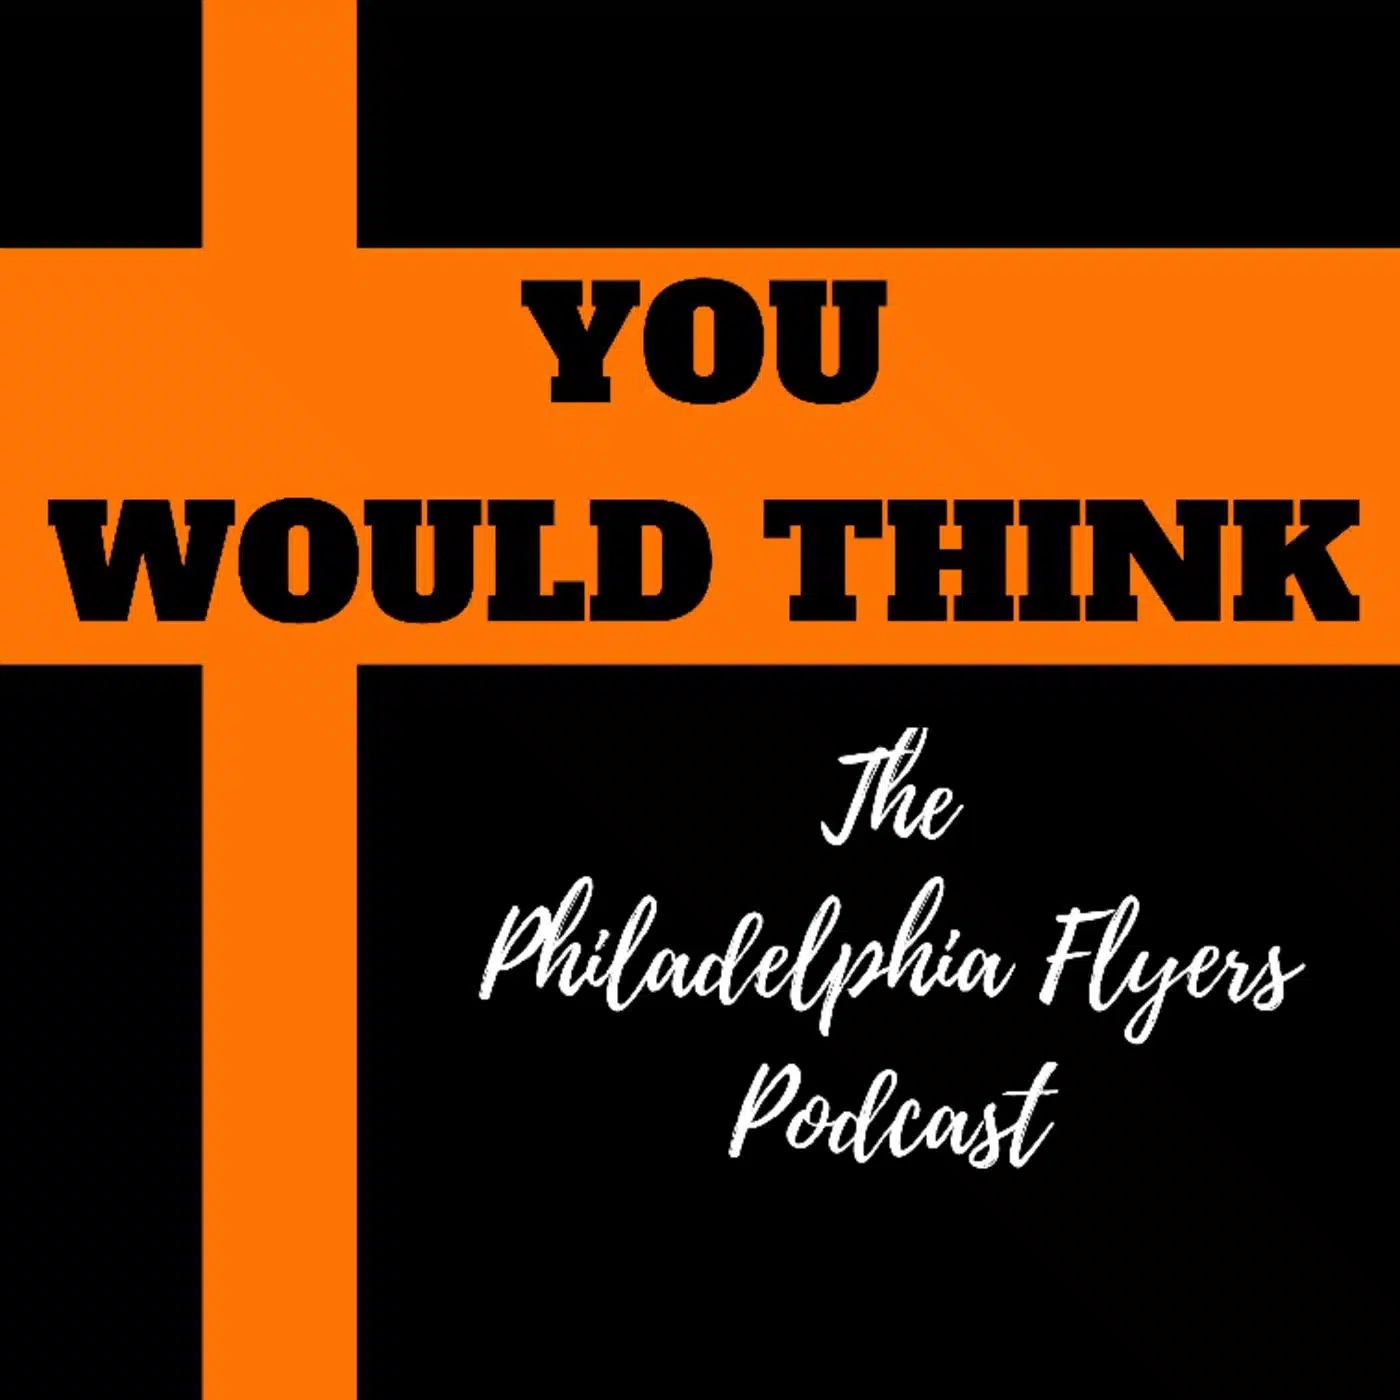 YWT: The Philadelphia Flyers Podcast – YWT #217 – Wait And See